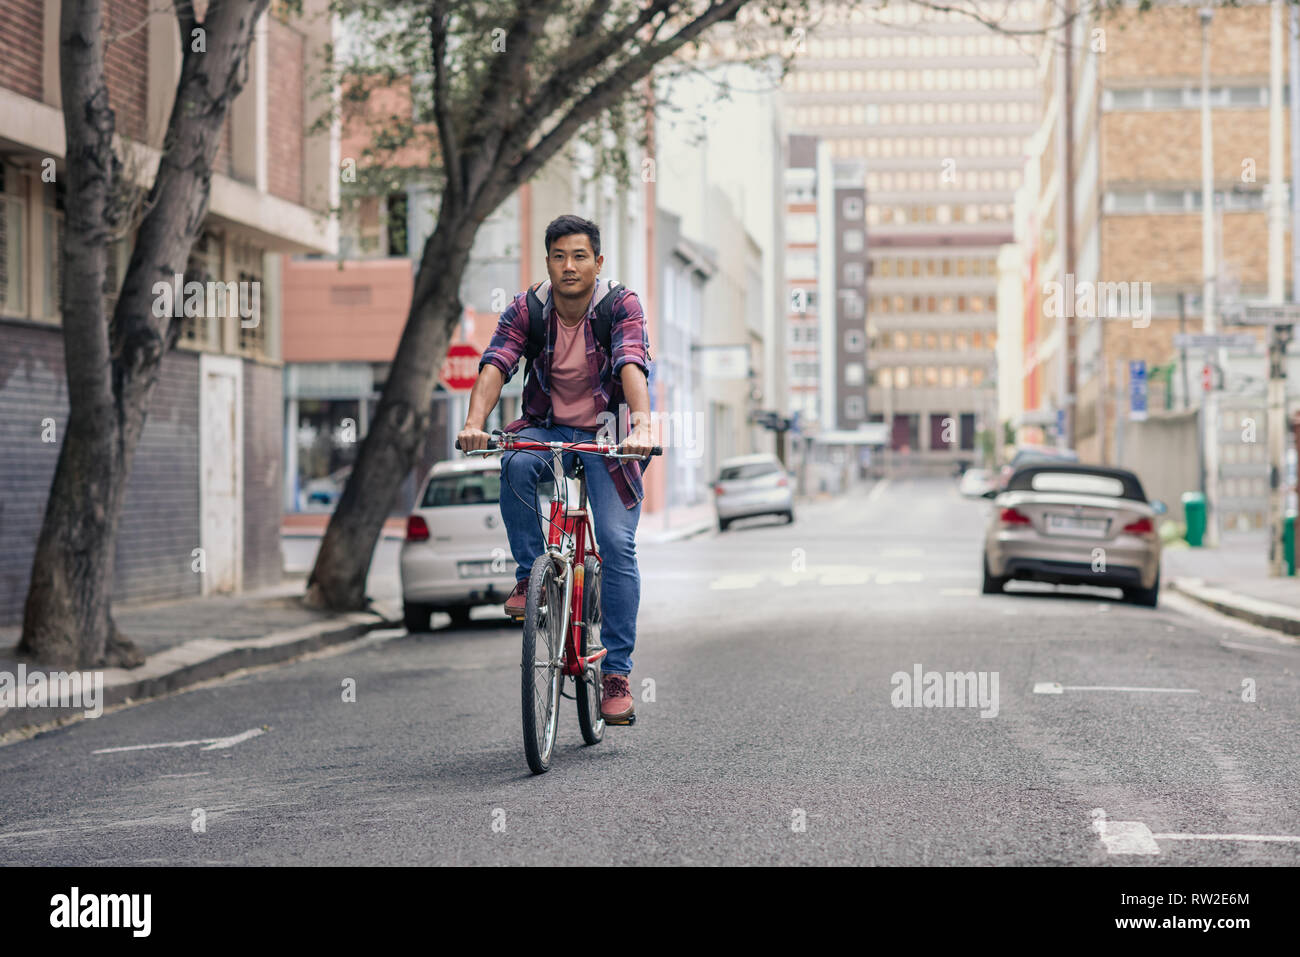 Young Asian man riding his bike on a city street Stock Photo